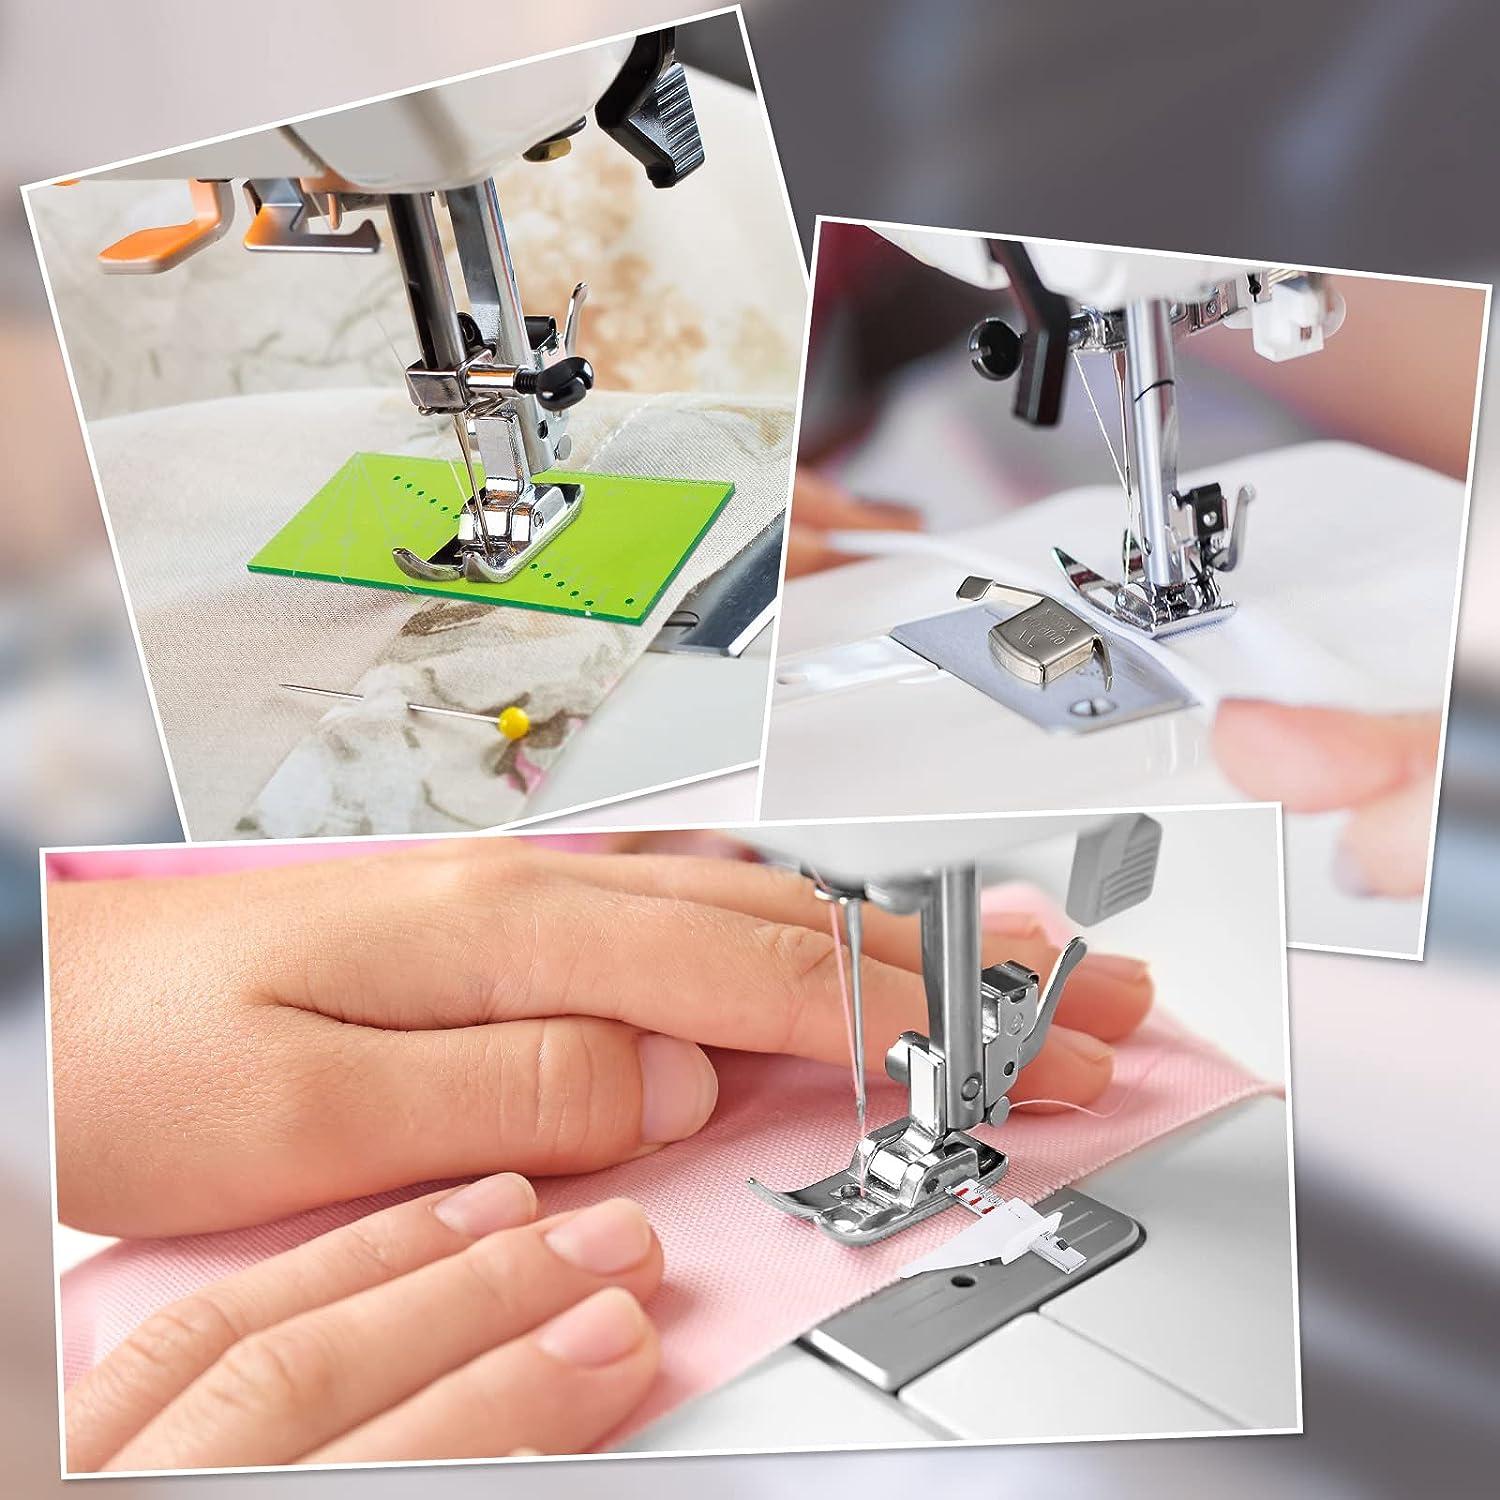 915 Generation 4 Models of Magnet for Sewing Machine Magnetic Seam Guide  Magnetic Guide Machine Presser Foot for Most Sewing Machine